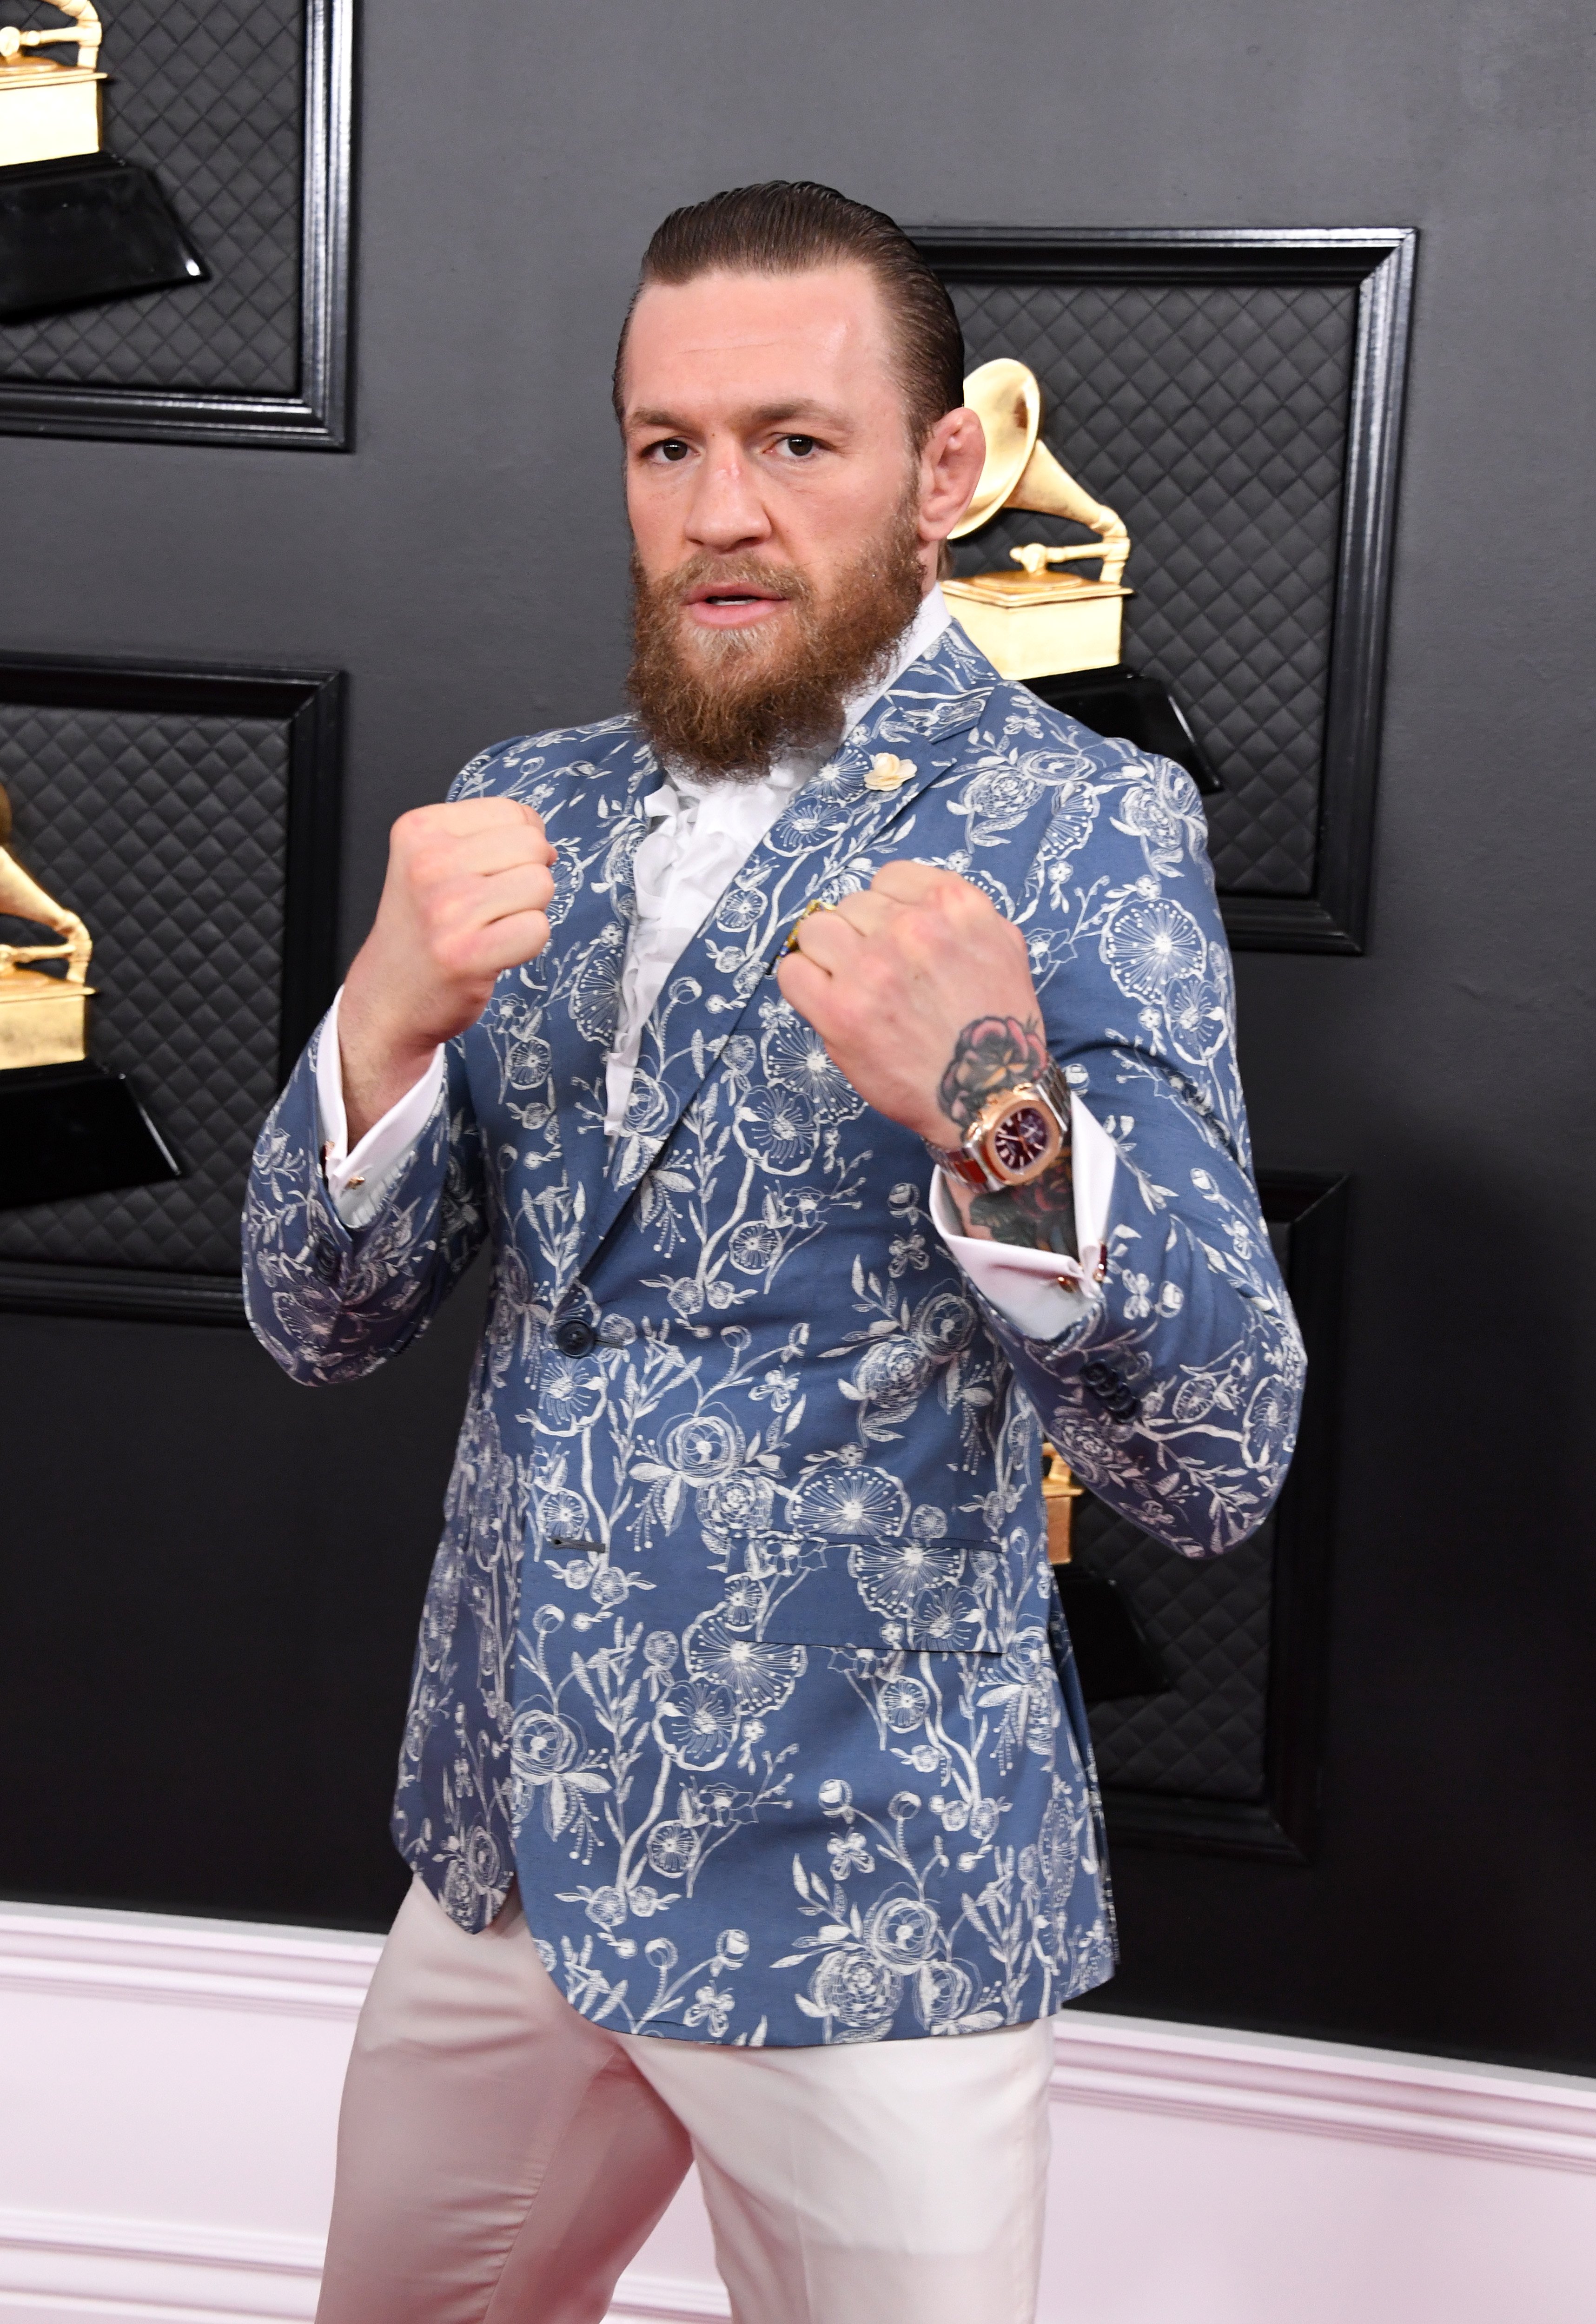 Conor McGregor pictured attending the 62nd Annual Grammy Music Awards, 2020, California. | Photo: Getty Images